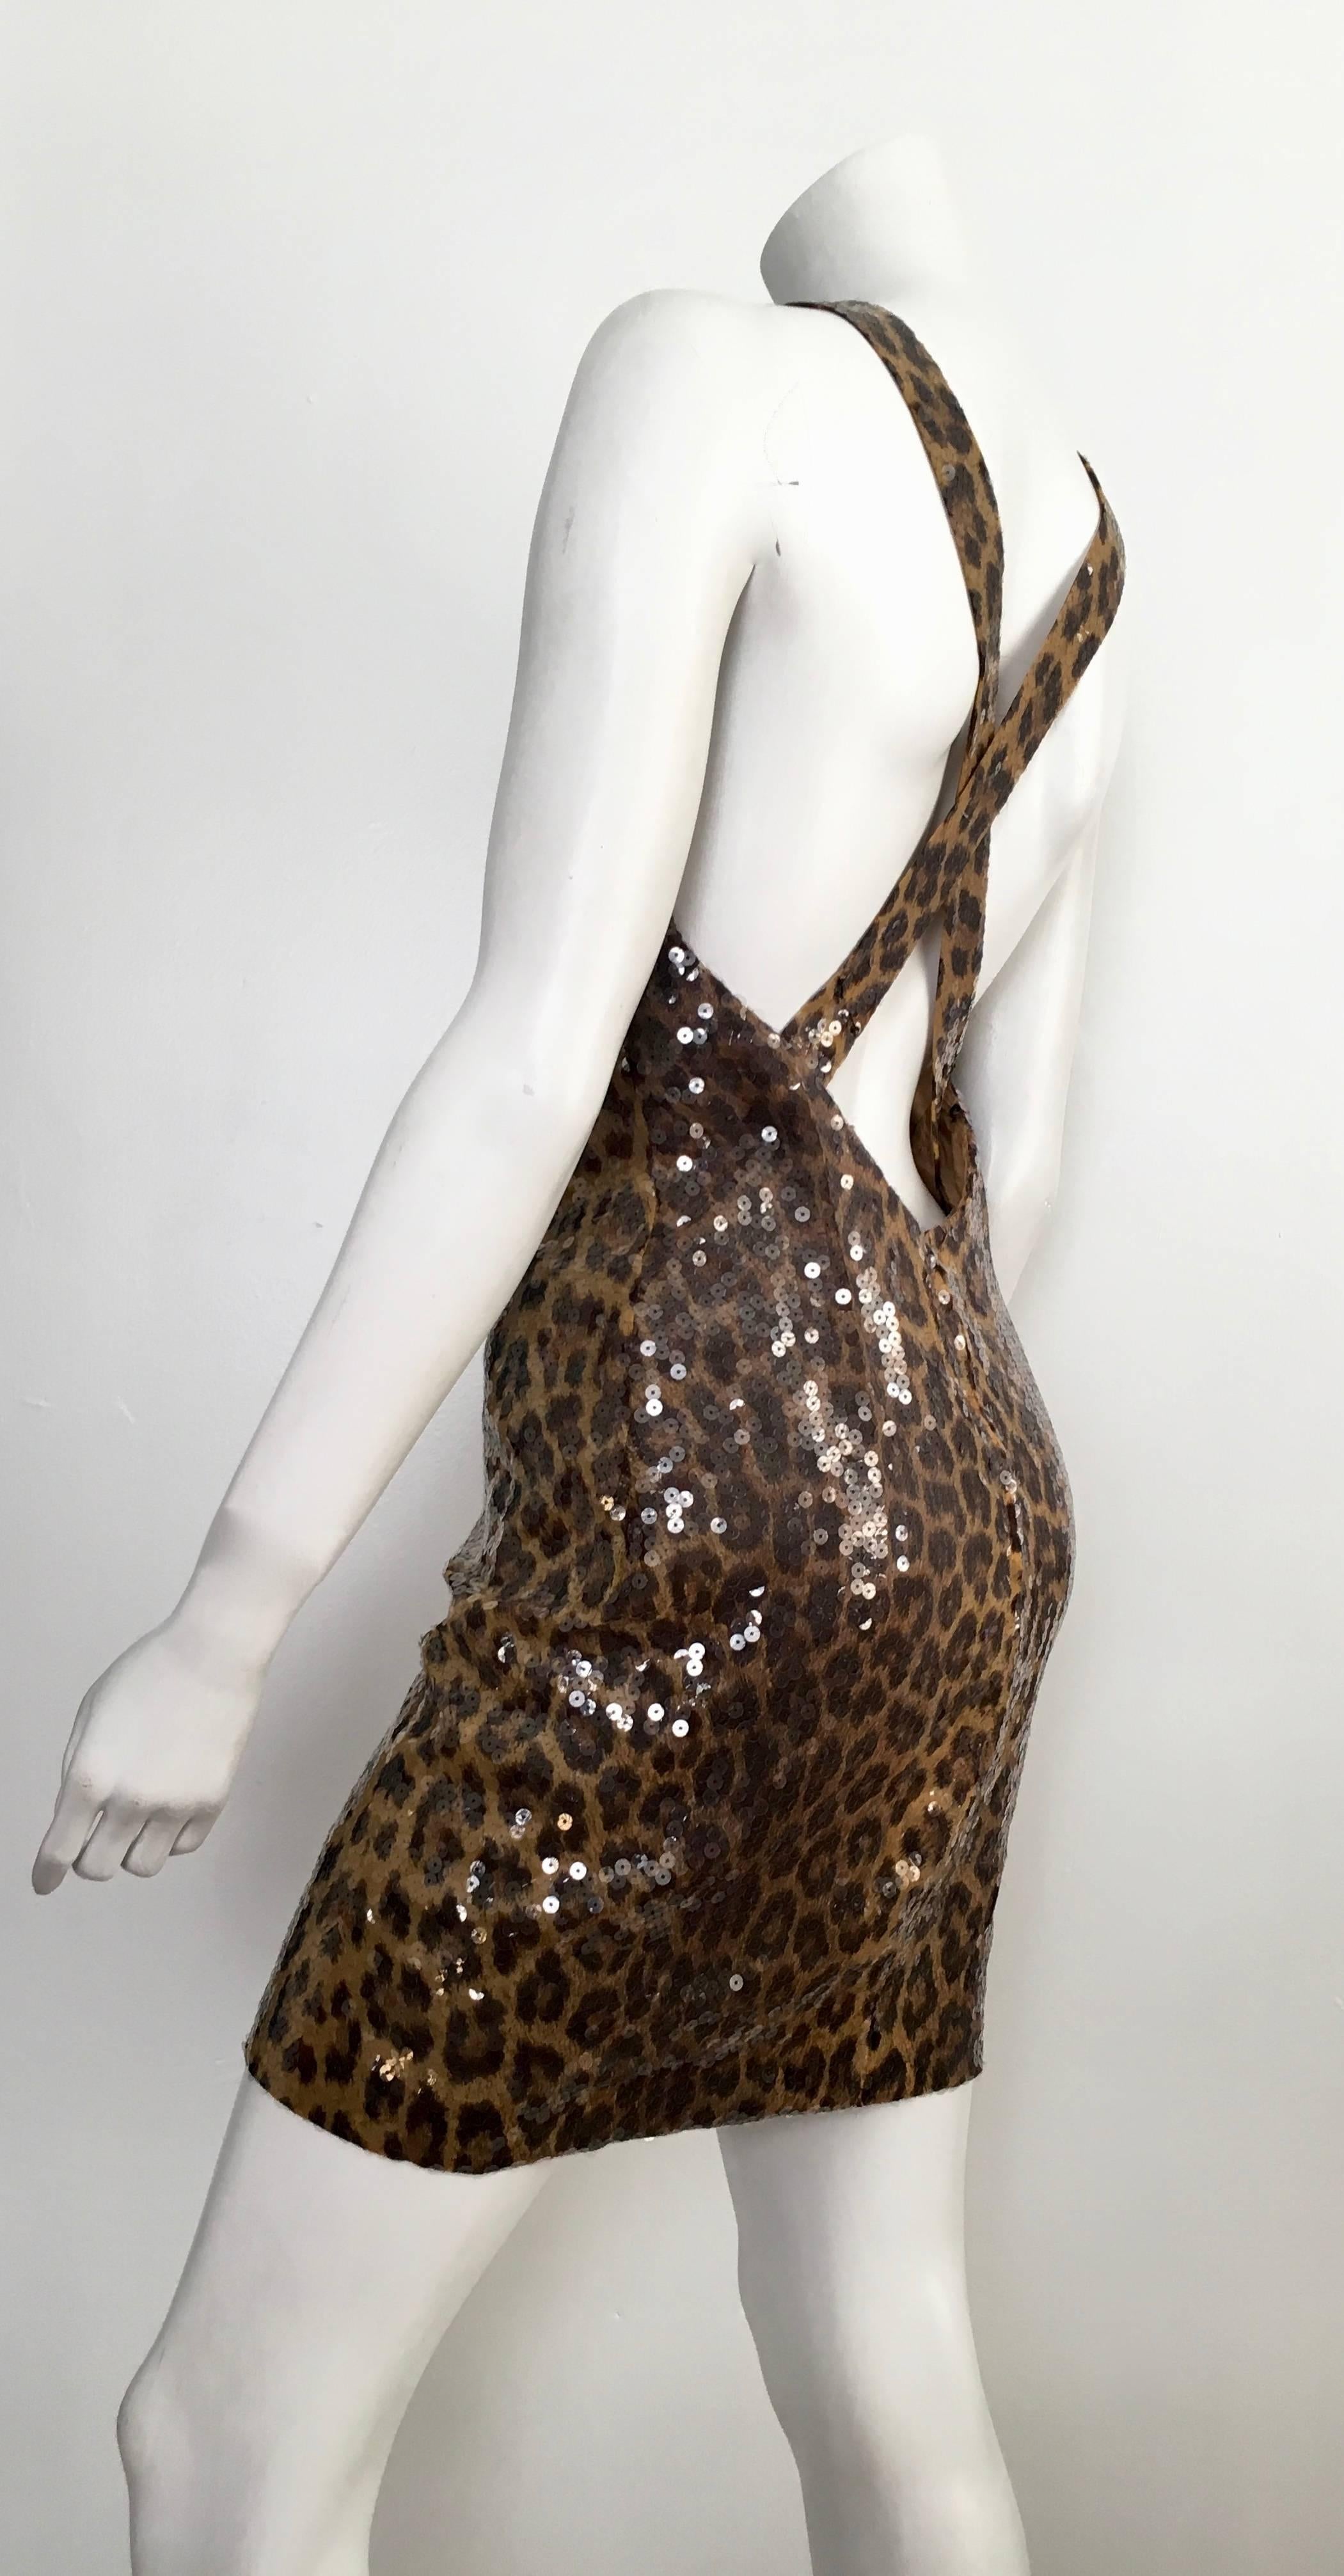 Vera Wang 1980s Sequin Cheetah Print Cocktail Dress Size 6. In Excellent Condition For Sale In Atlanta, GA